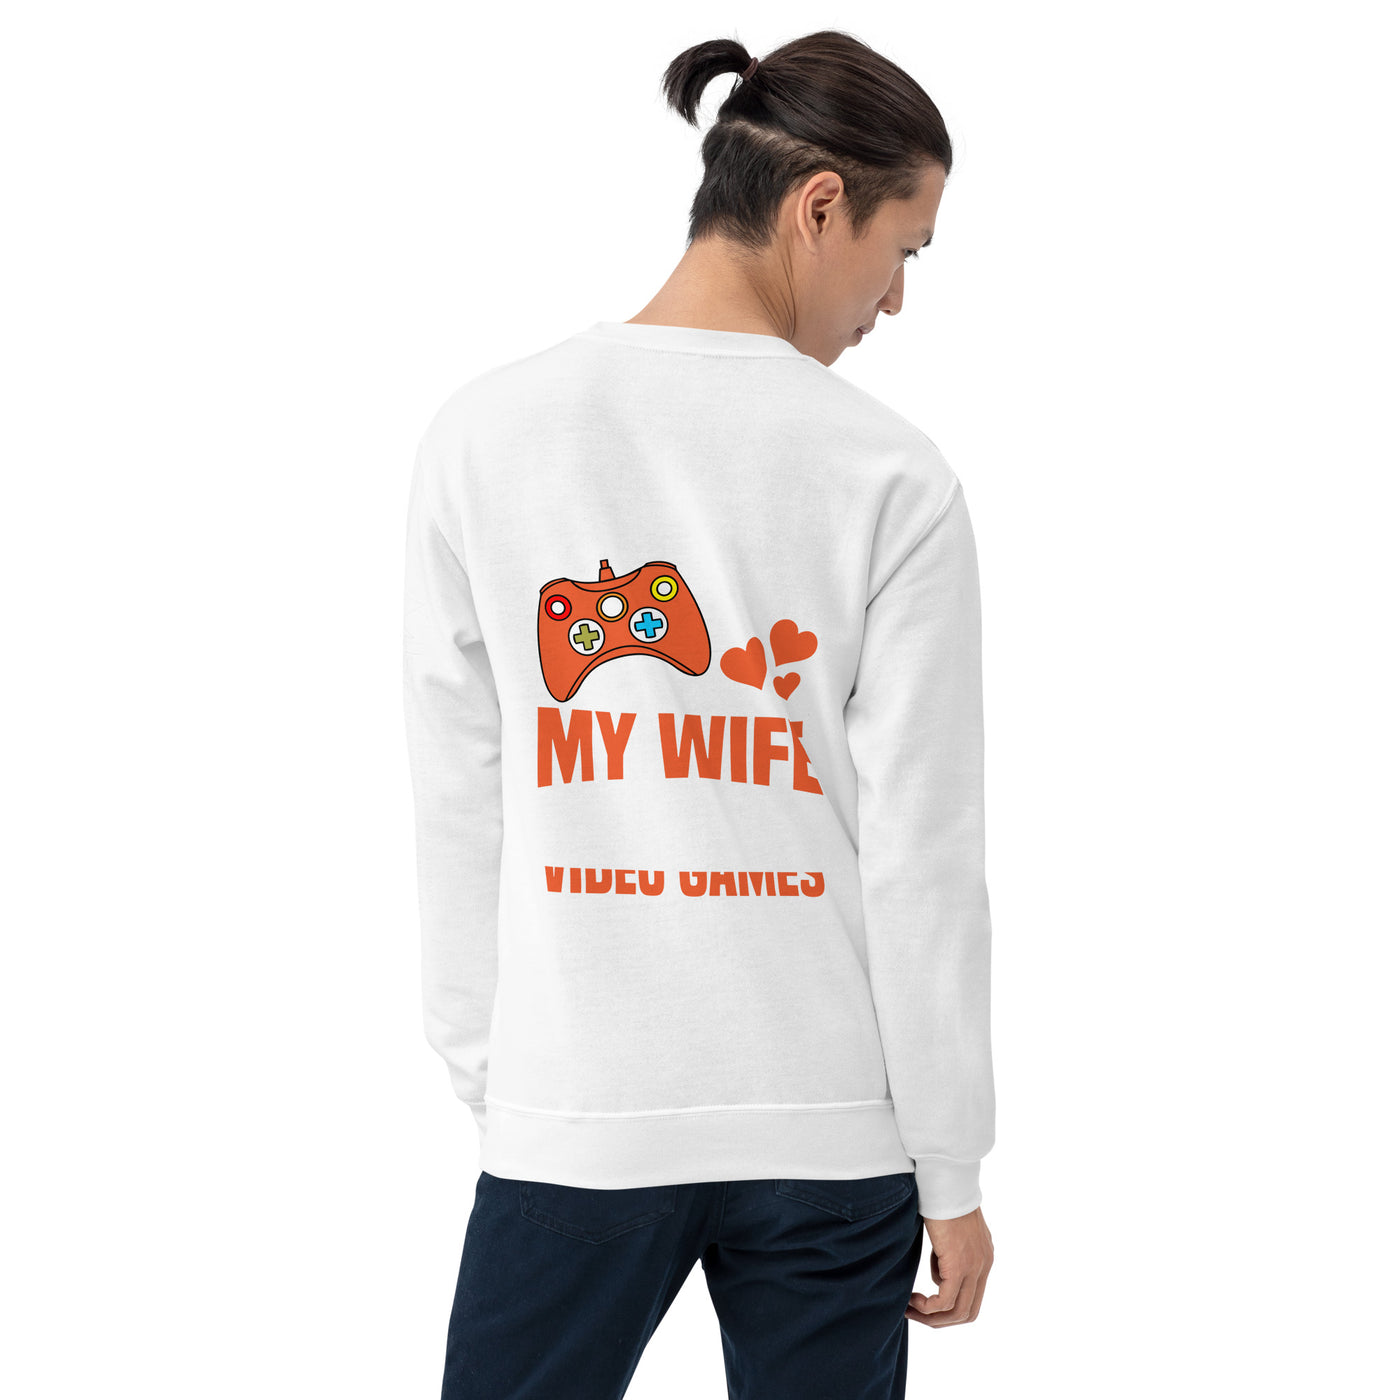 I love it when My wife Let me Play Videogames - Unisex Sweatshirt ( Back Print )